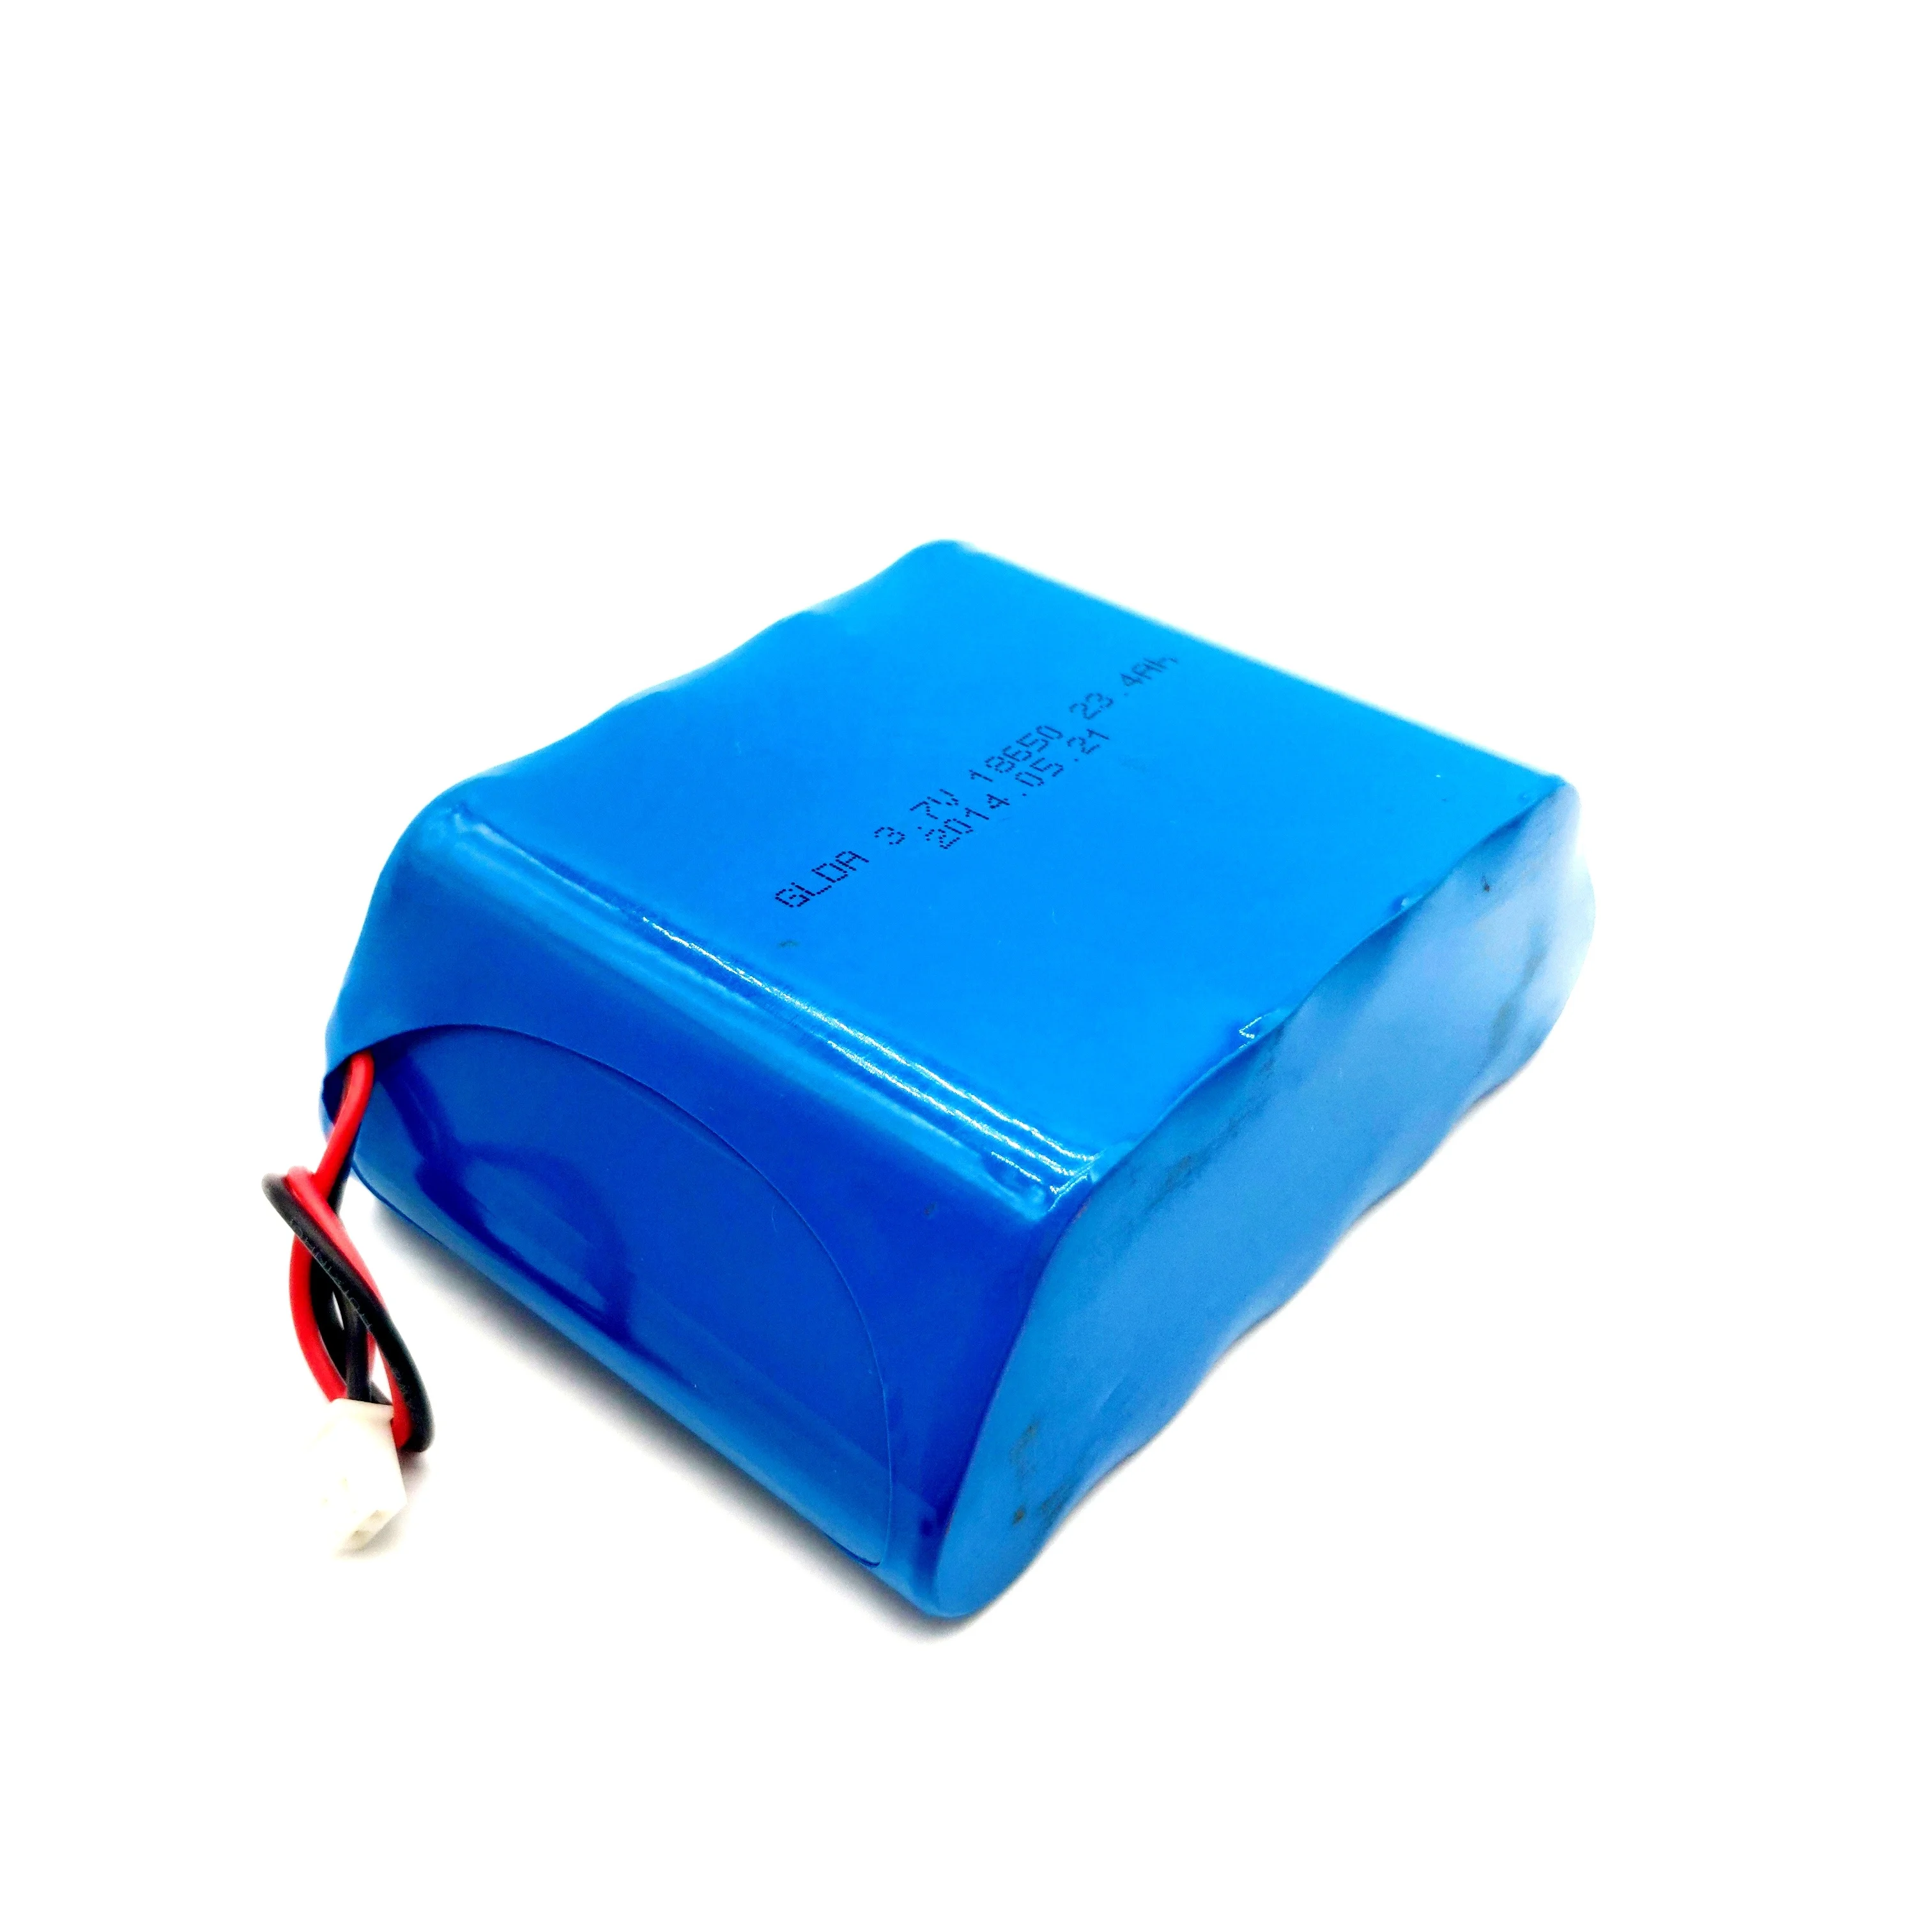 18650-1S9P 3.7V 23.4Ah Trapezoid Lithium ion battery pack